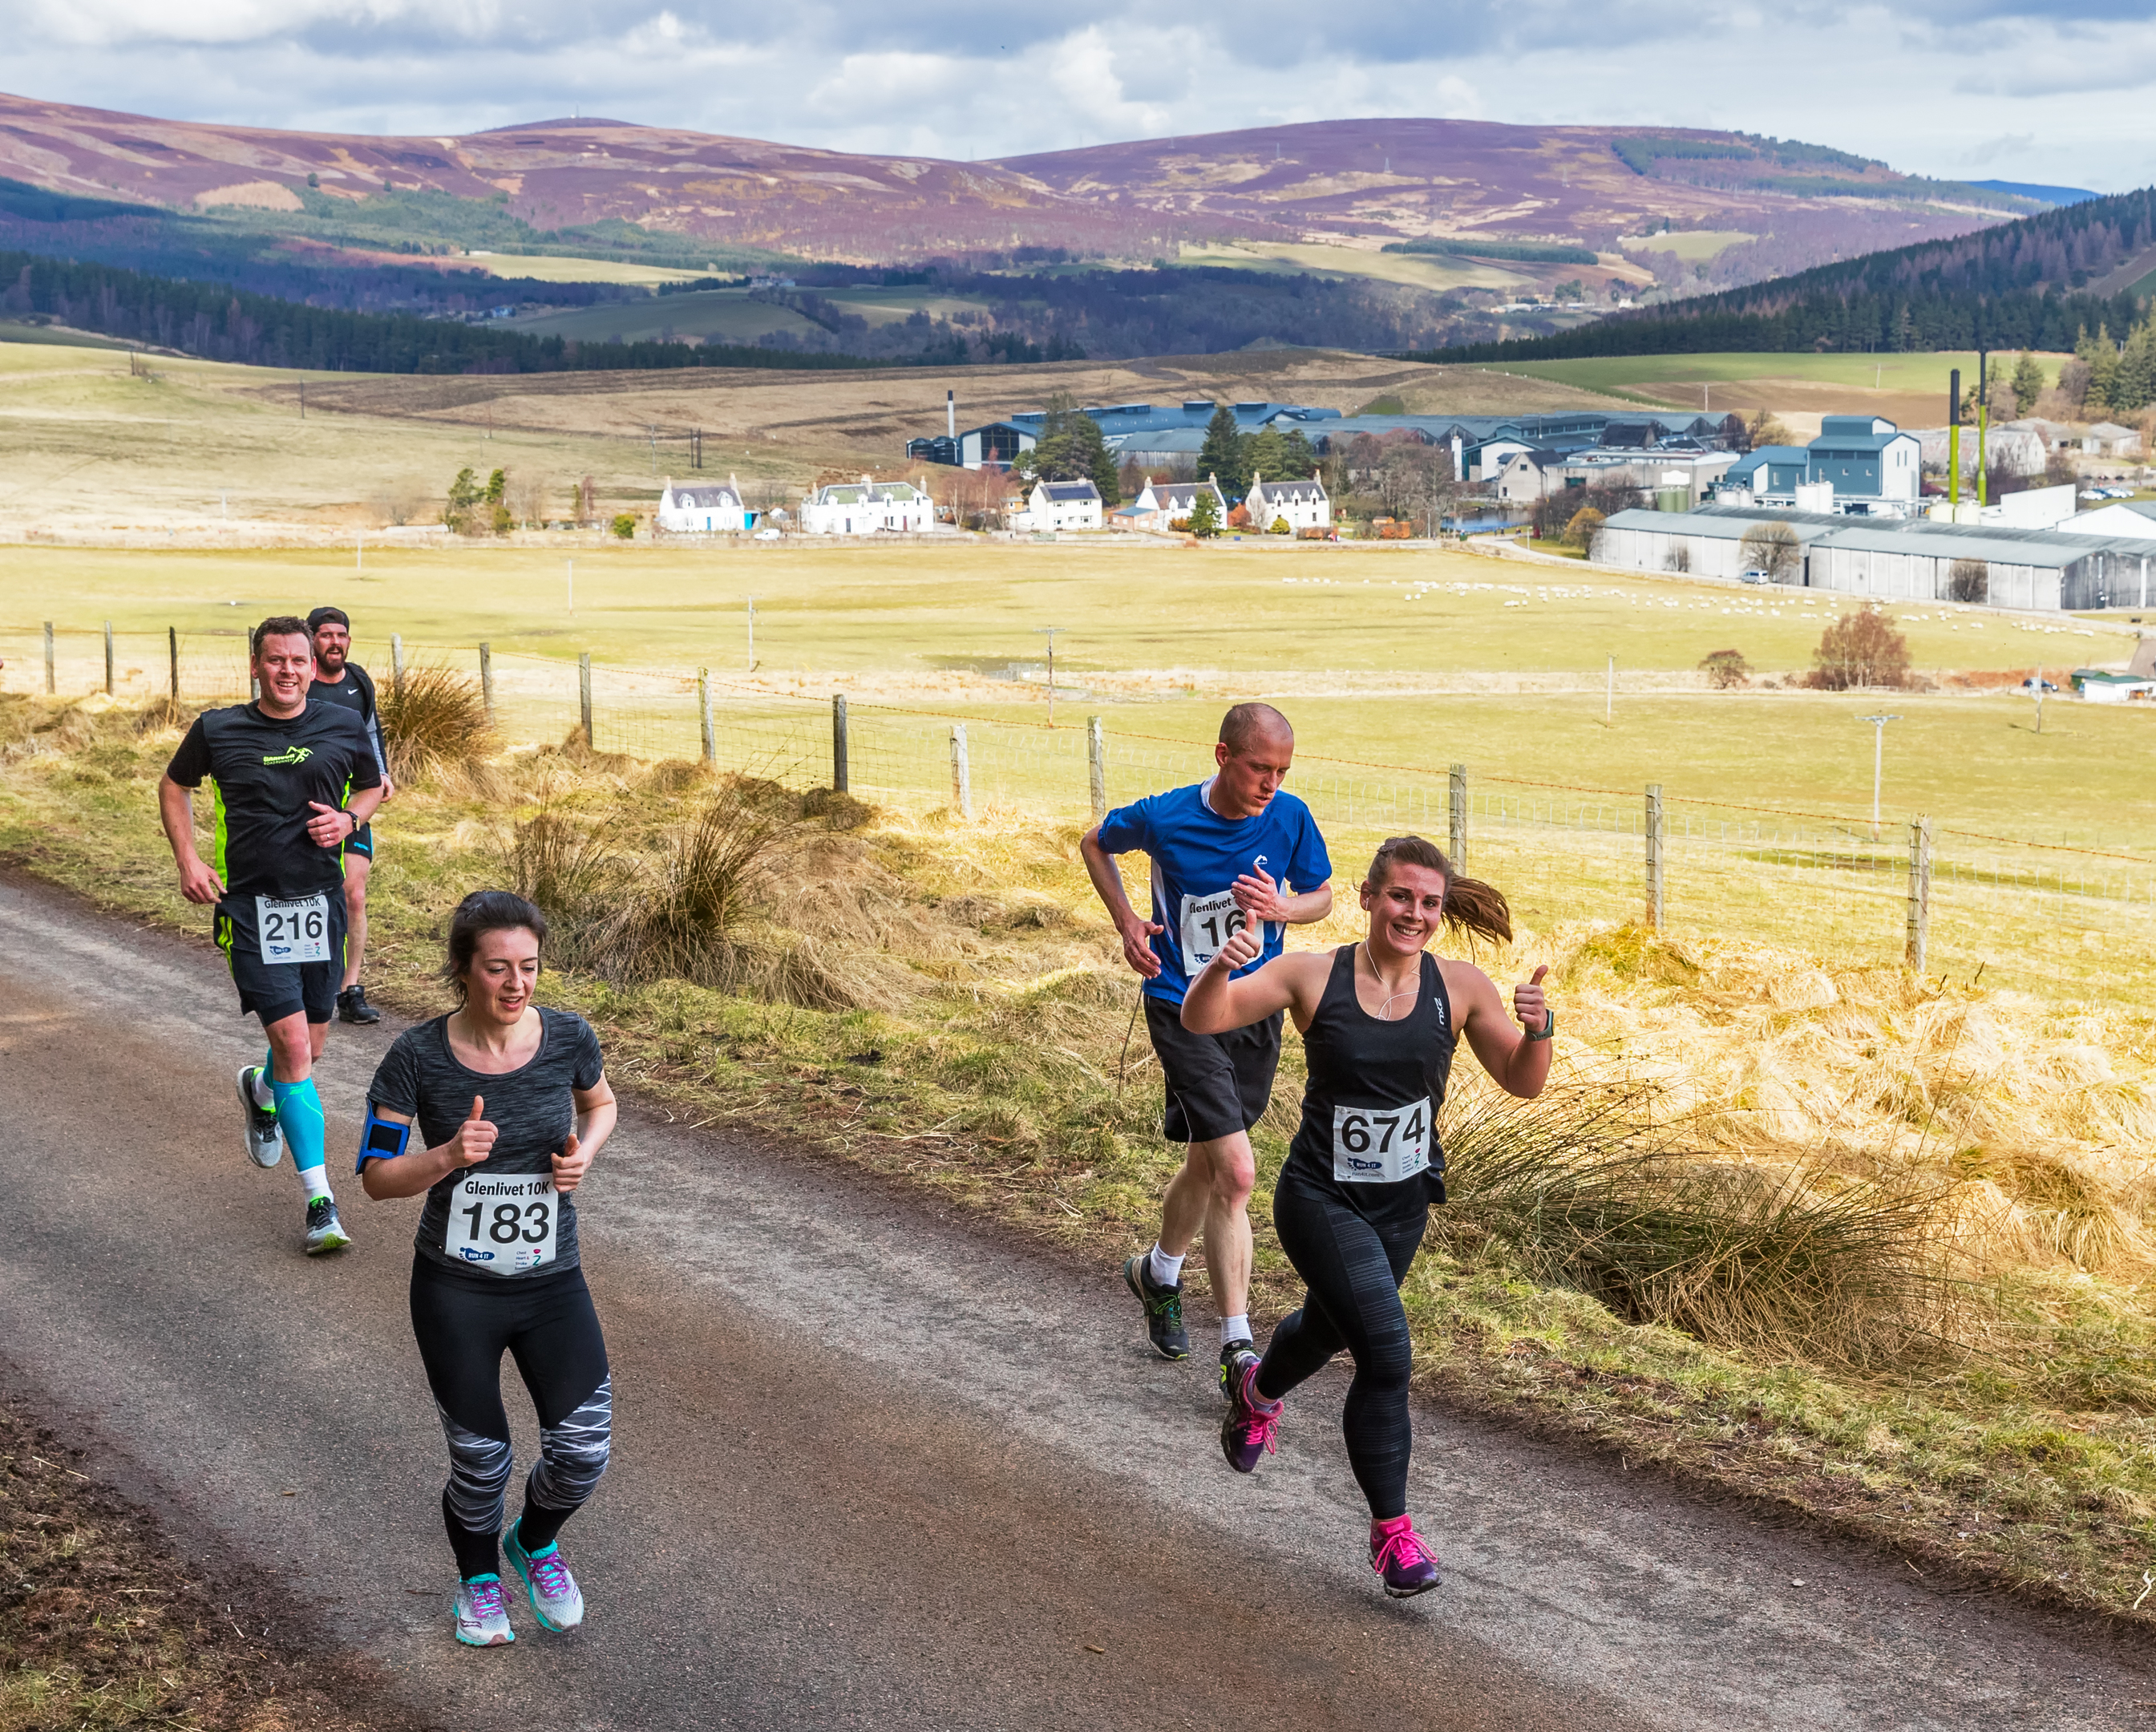 Runners reach the top of the incline and give a thumbs up during the Glenlivet 10K yesterday.